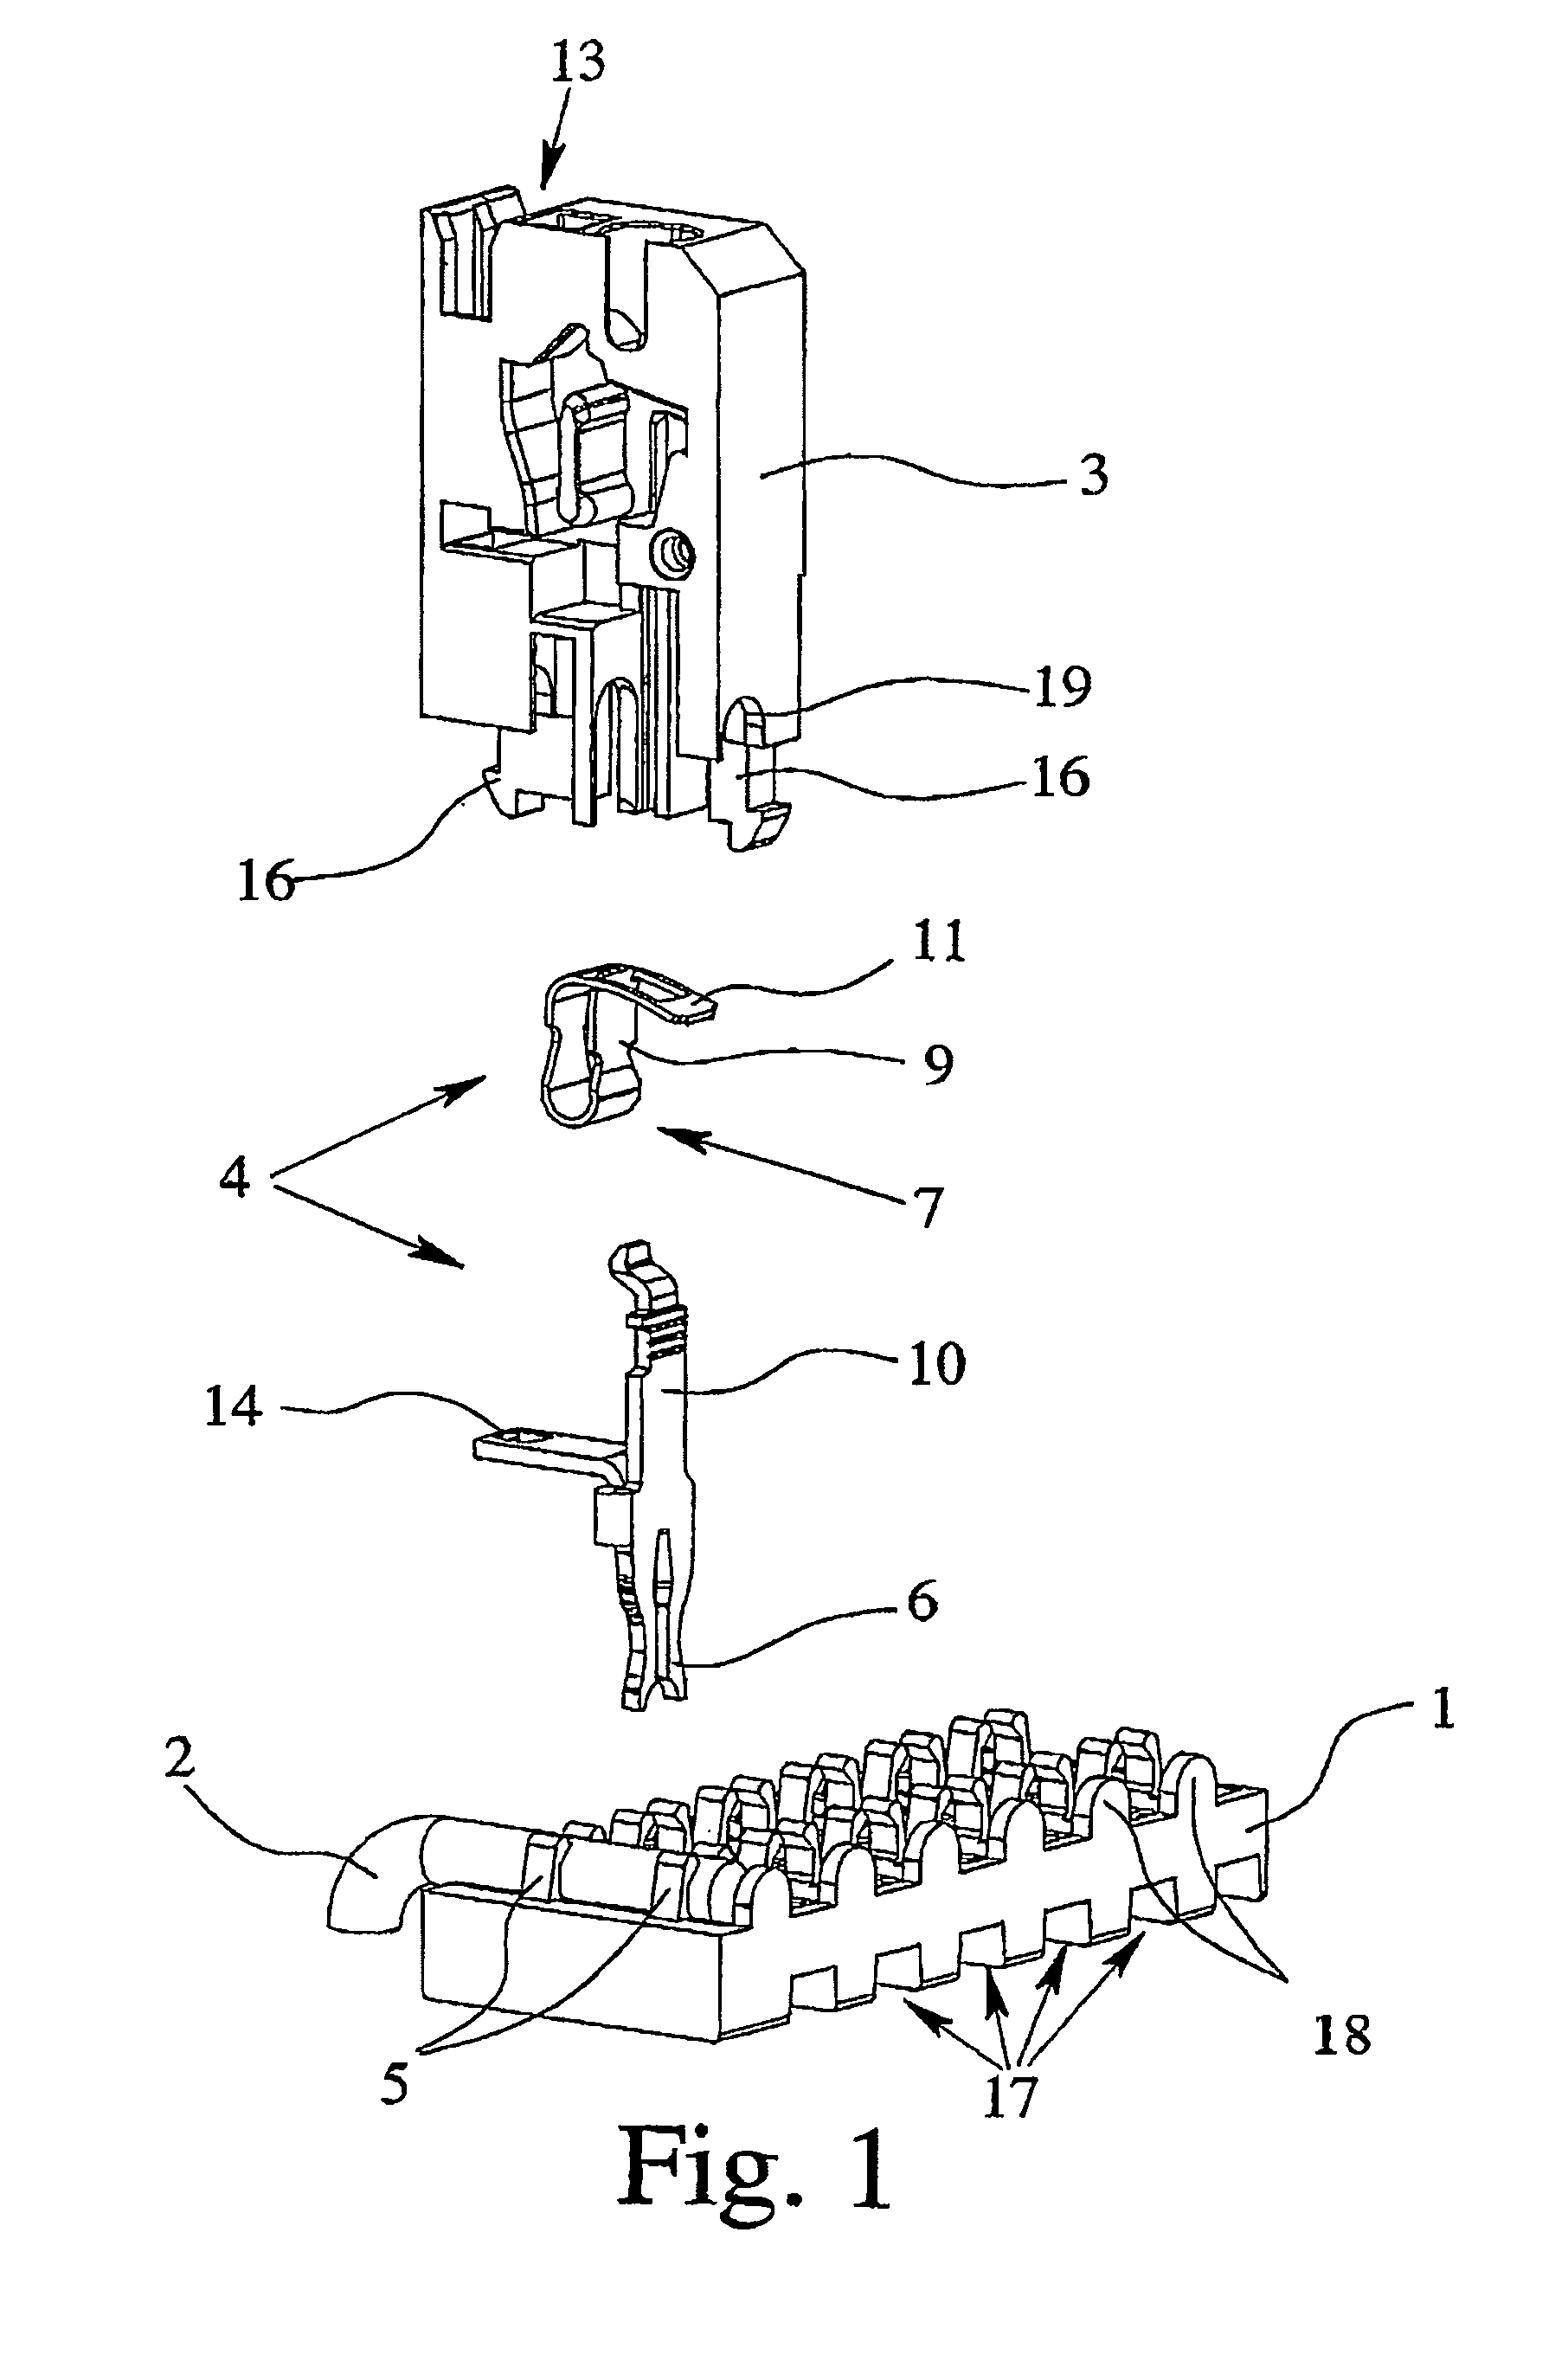 Electrical connection arrangement with simplified fastening device for electrical connection of an electrical device